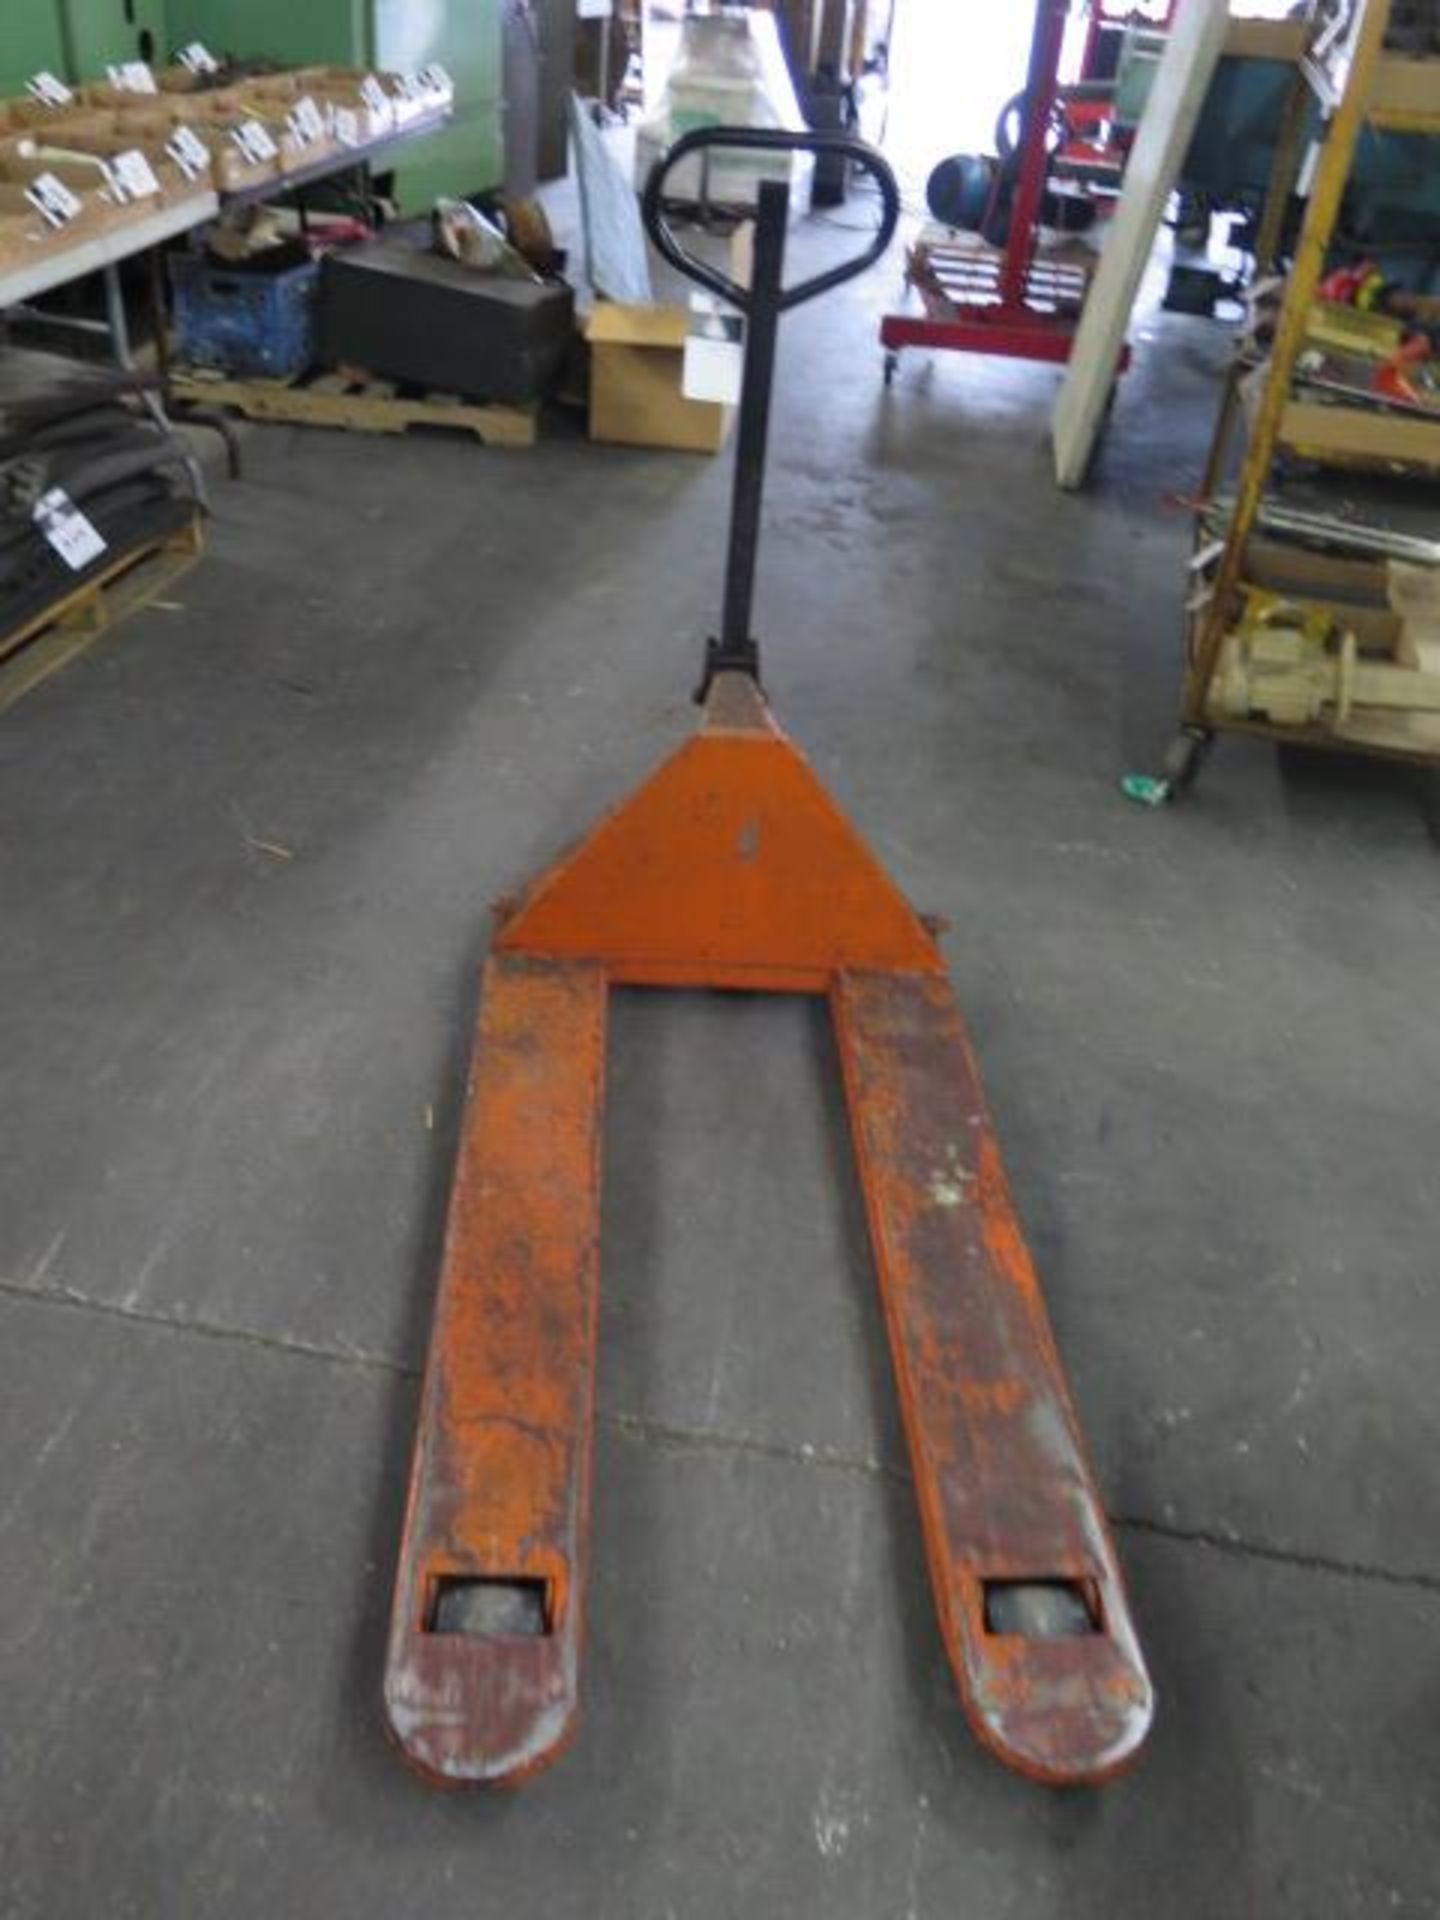 Pallet Jack (SOLD AS-IS - NO WARRANTY) - Image 2 of 4